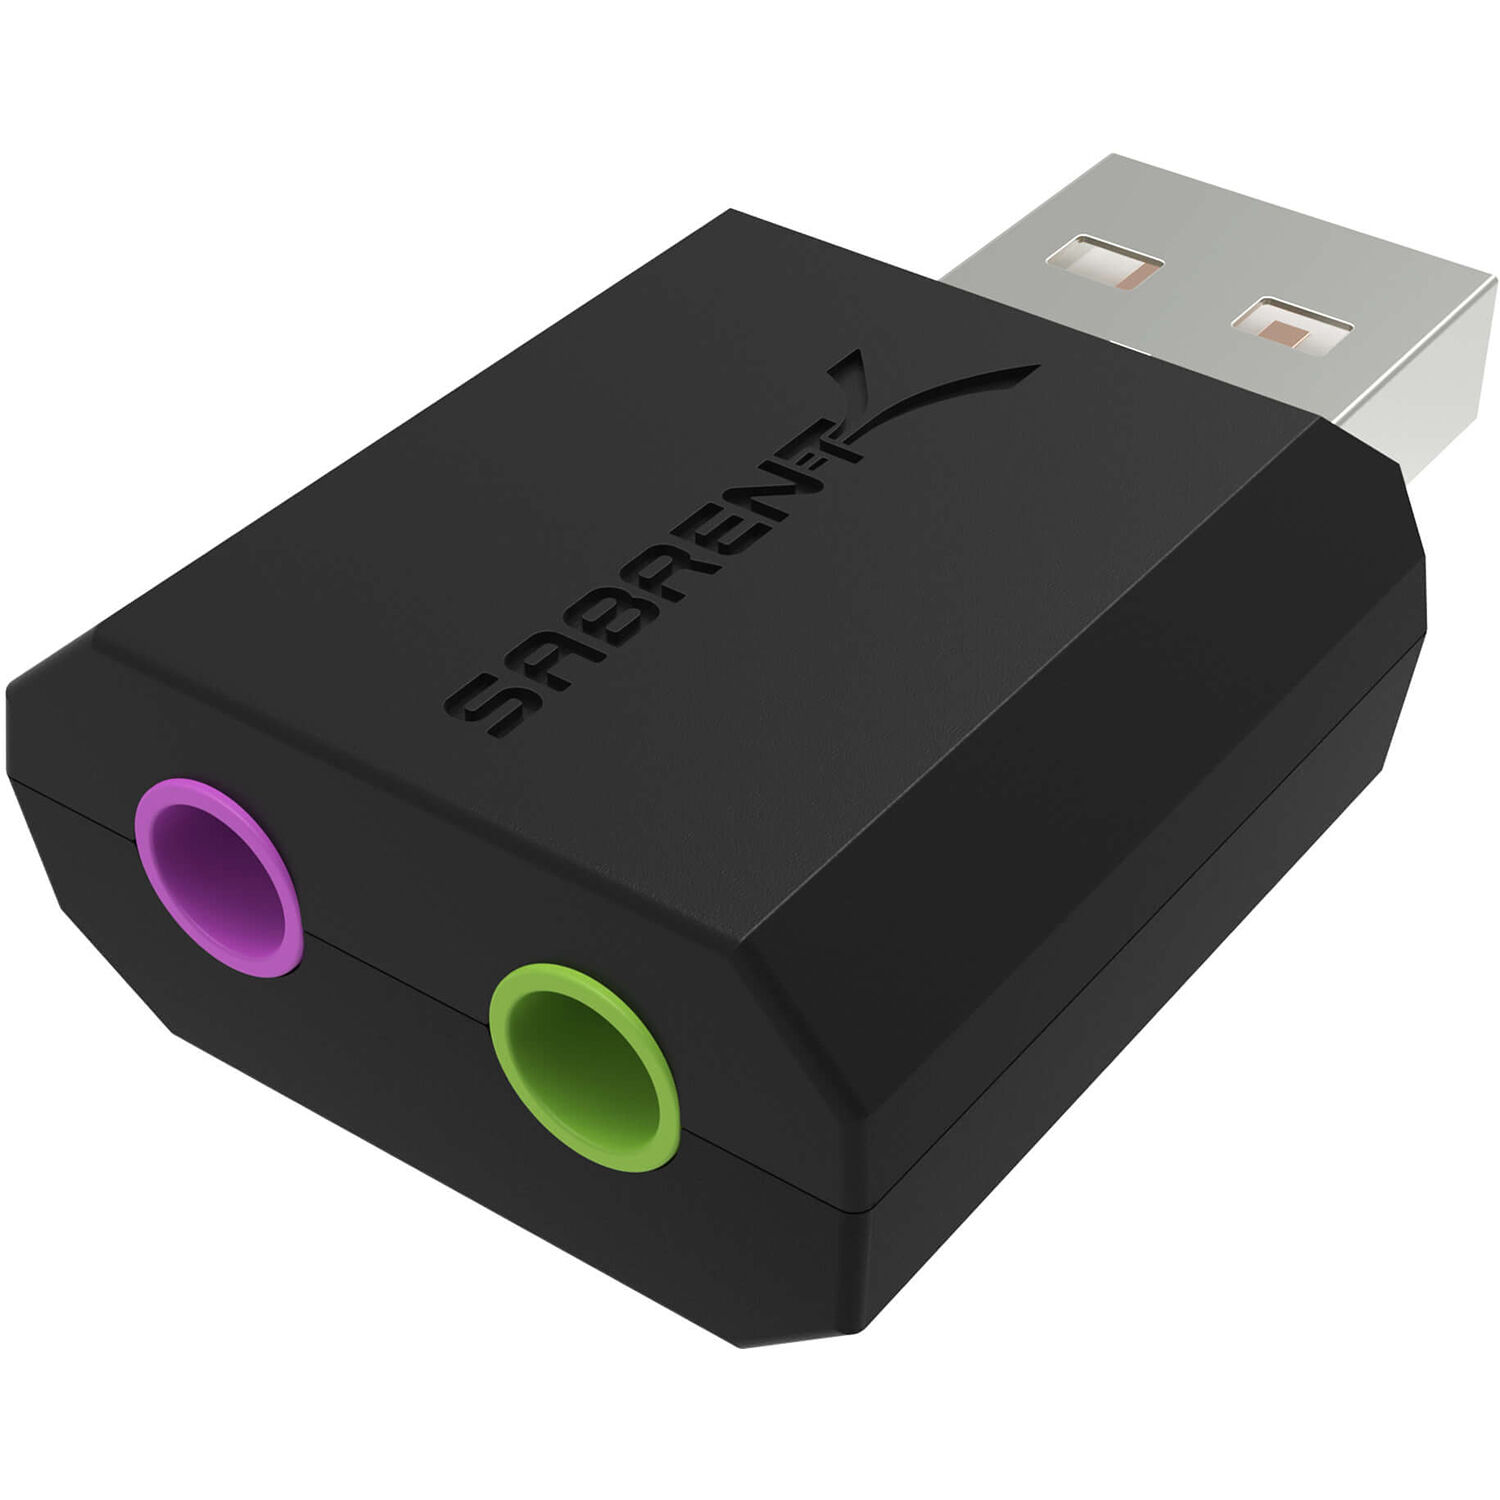 usb 2.0 external stereo audio adapter for mac